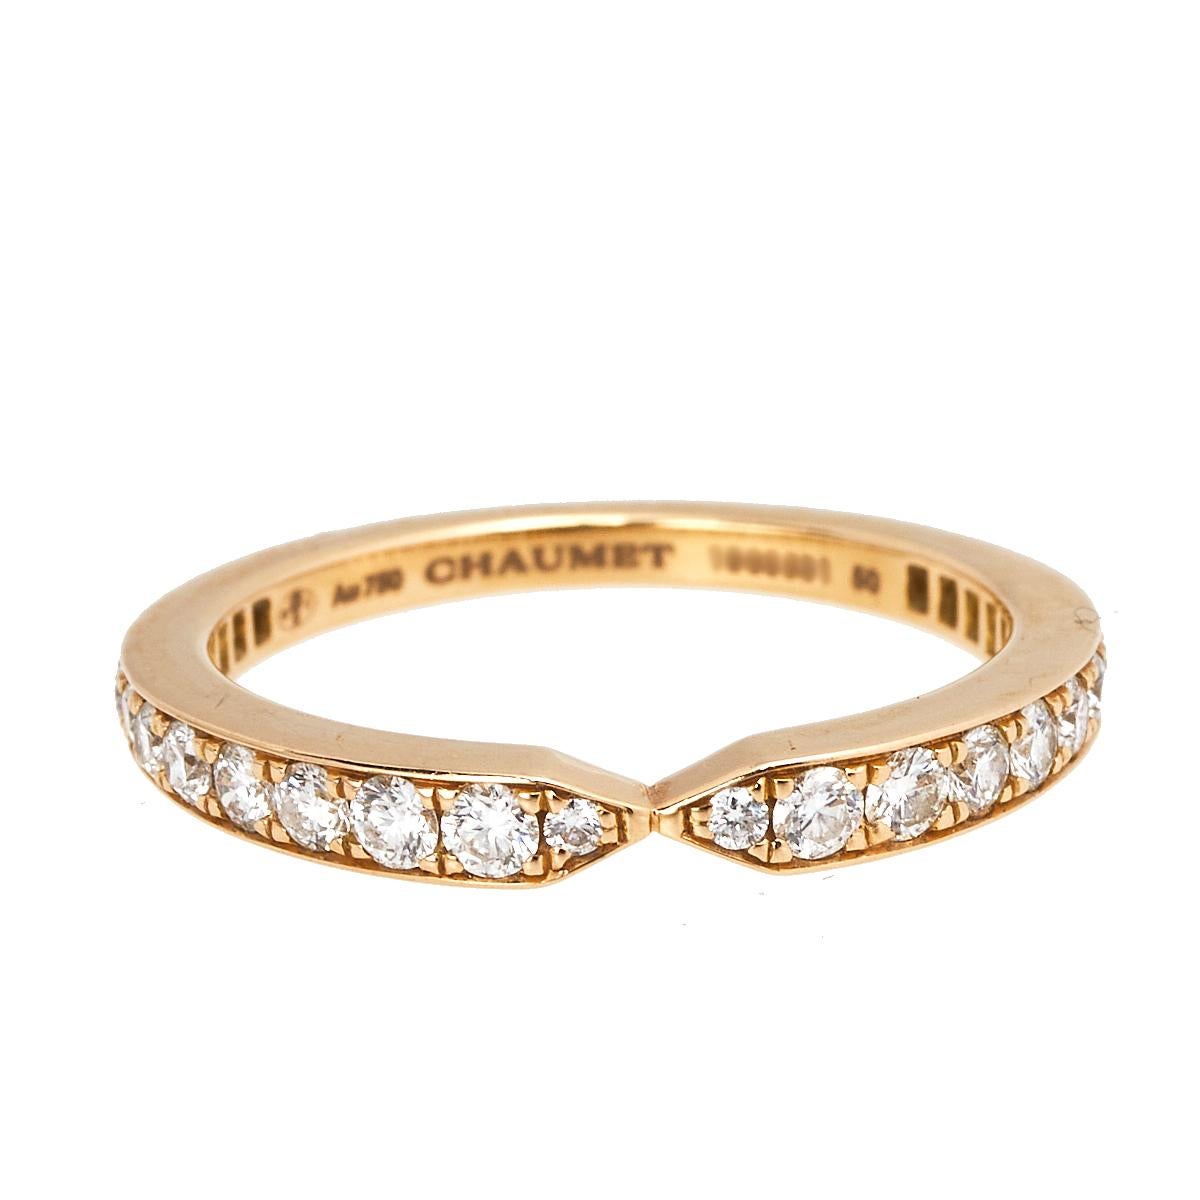 Charming jewelry lovers since its inception, Chaumet stands as a true symbol of exquisite craftsmanship and attention to detail. This magnificent wedding band ring is brought to life using 18k rose gold, adorned with shimmering round brilliant cut